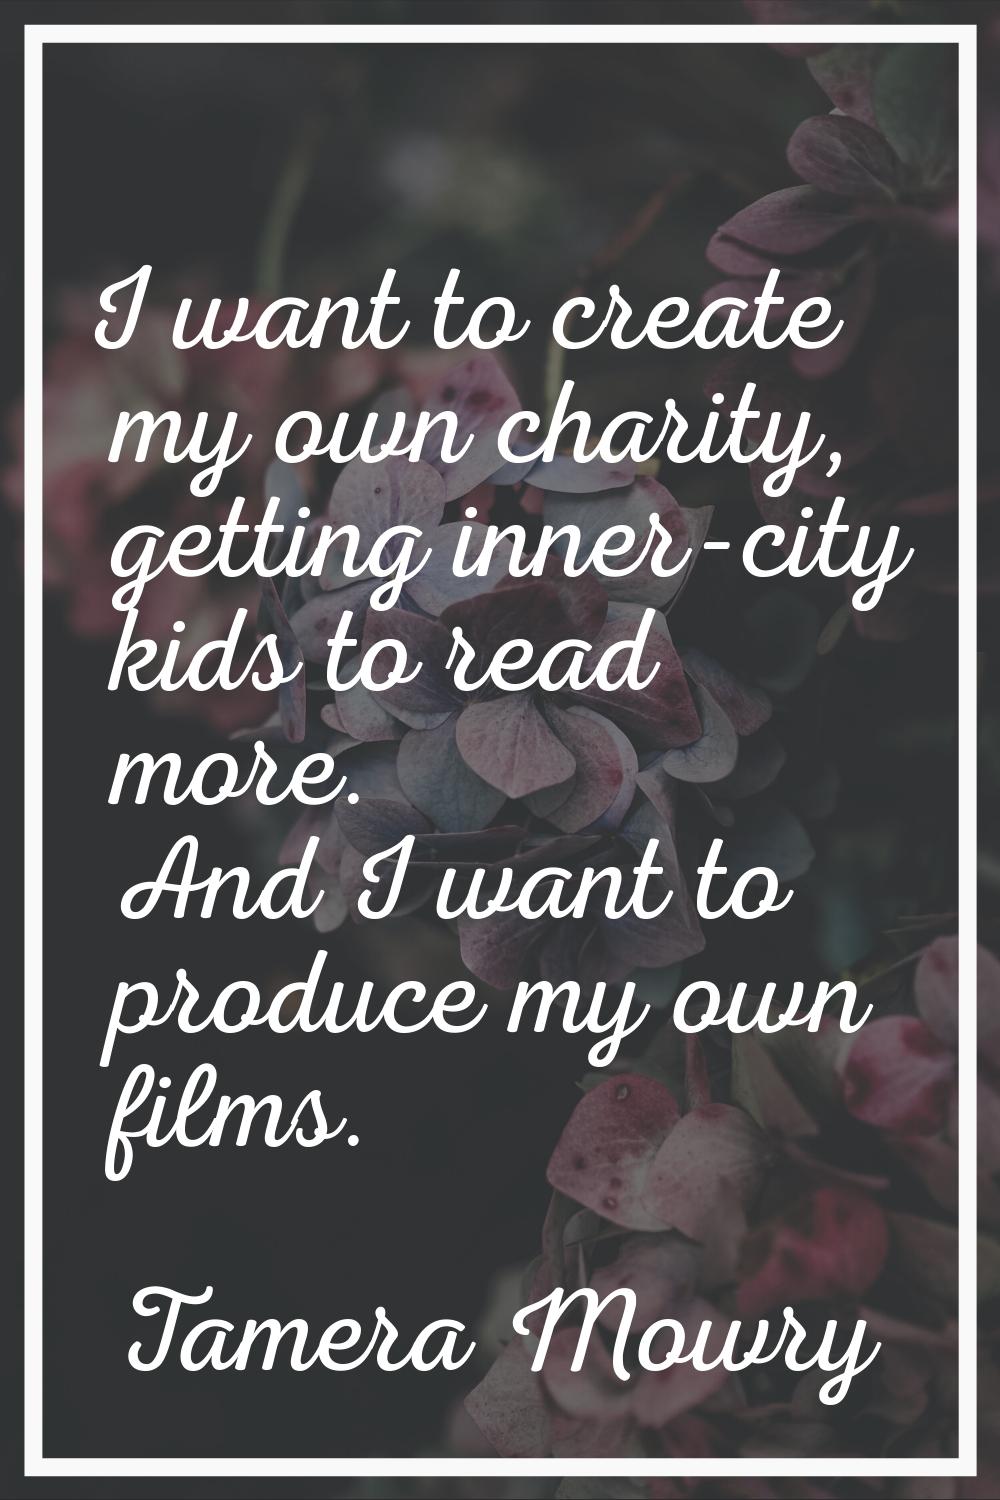 I want to create my own charity, getting inner-city kids to read more. And I want to produce my own